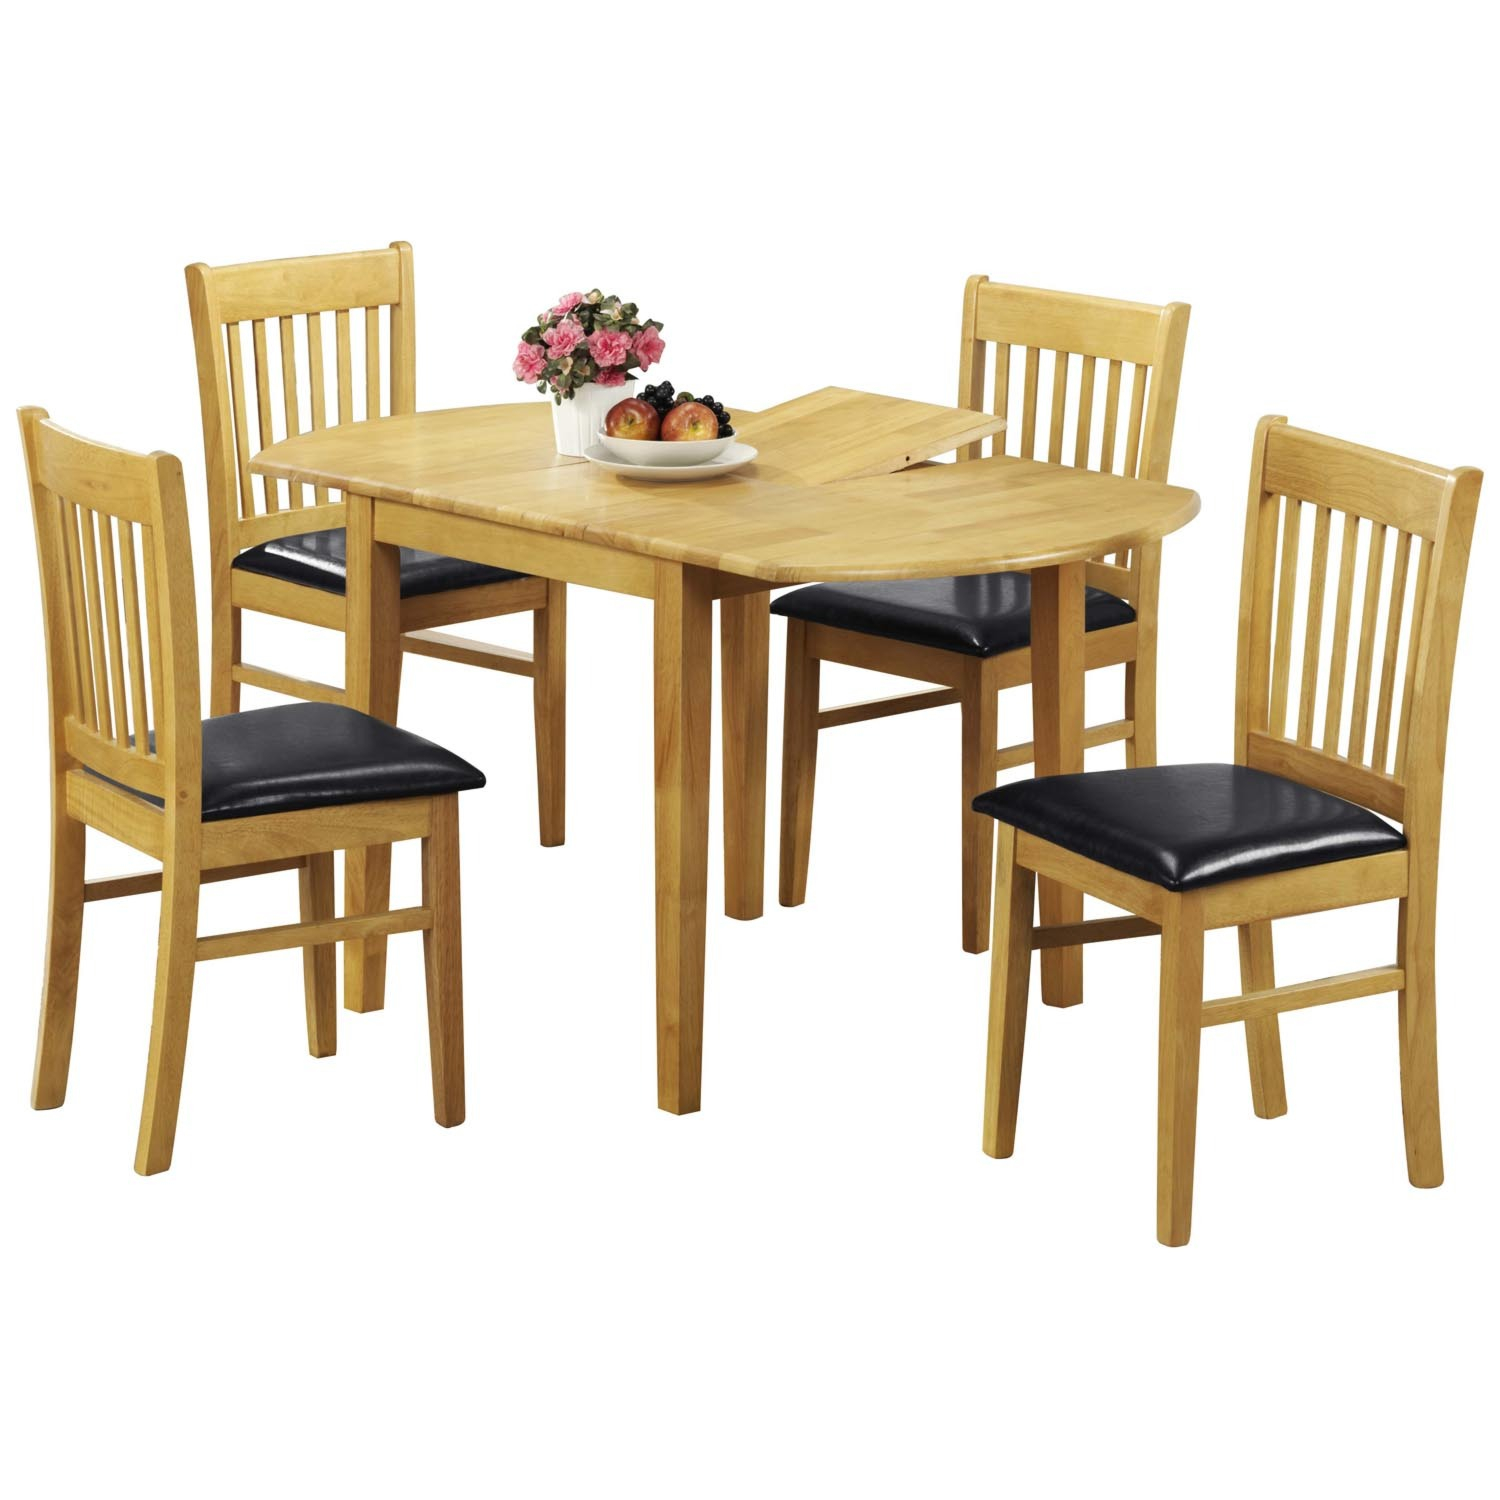 Sussex Dining Table And Four Chairs Set with size 1500 X 1500